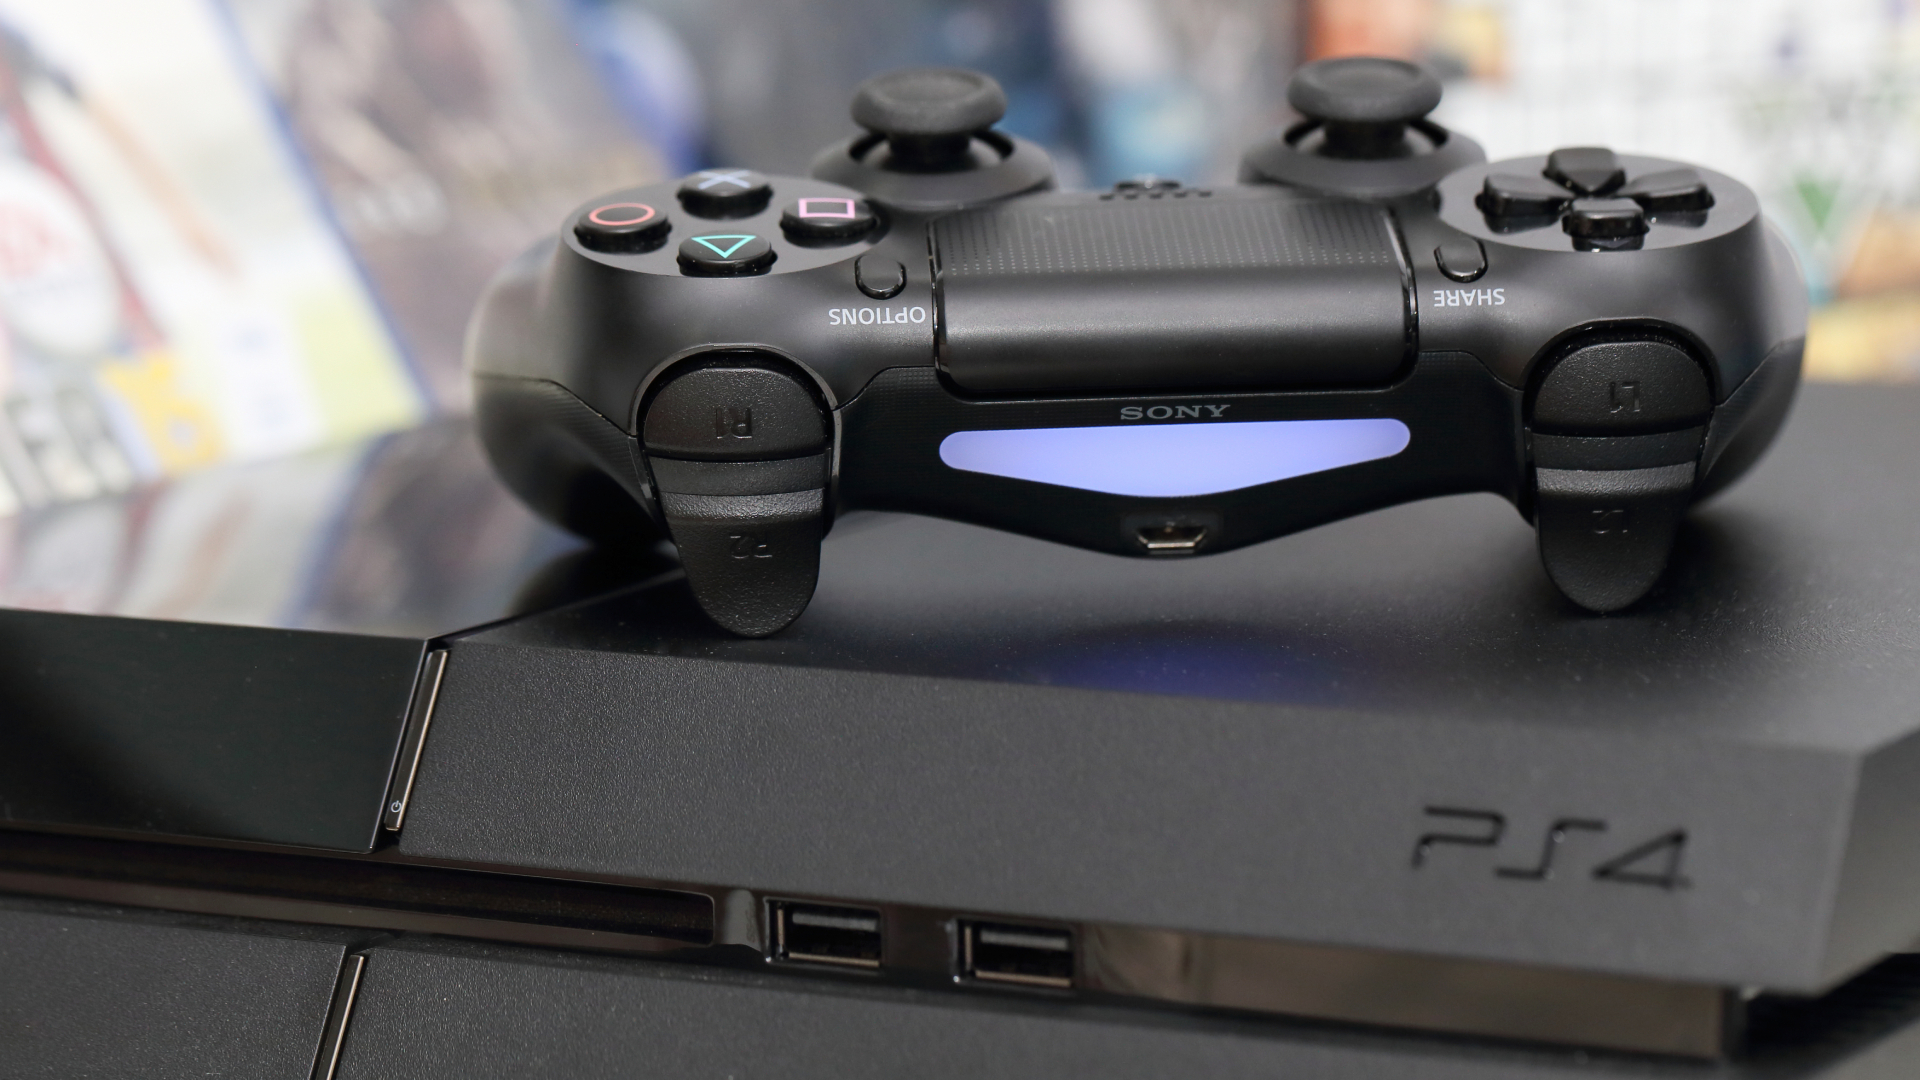 PS5 Slim: when will we see a smaller, lighter PlayStation 5?